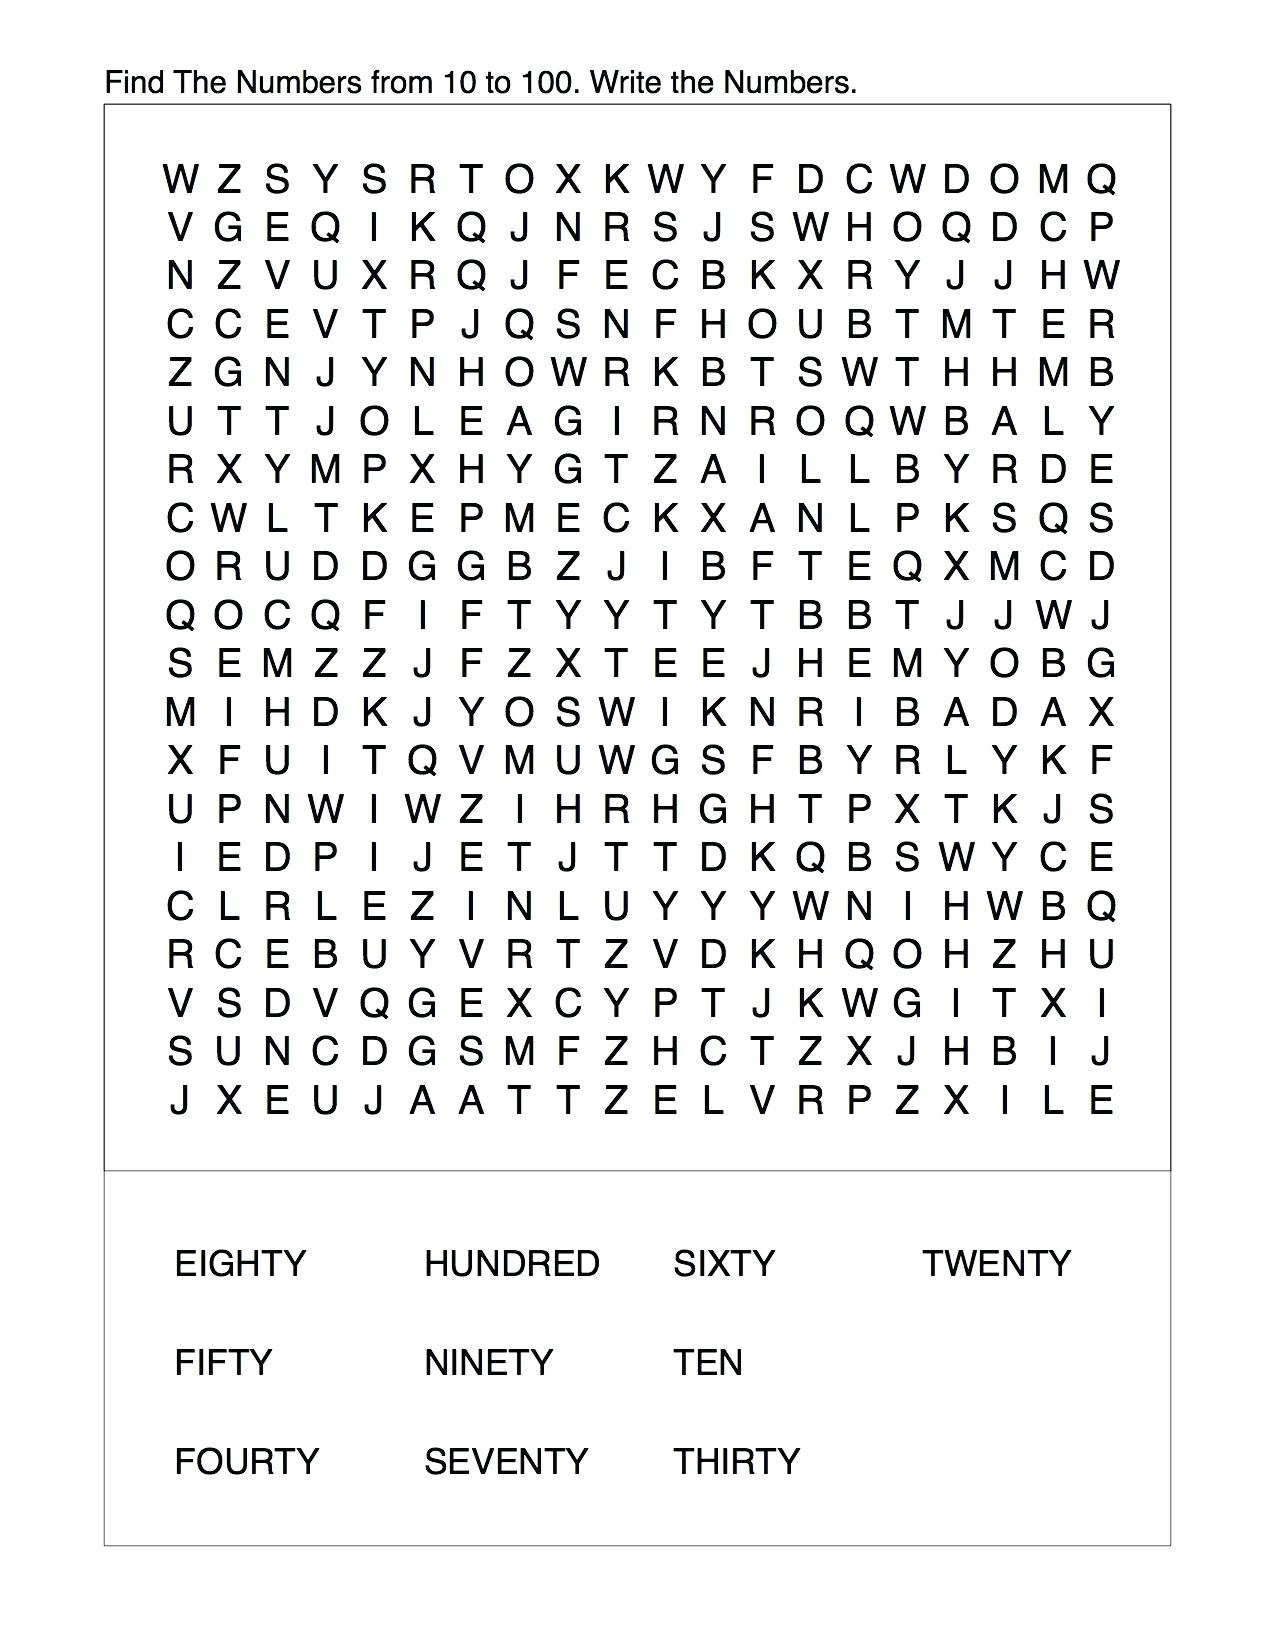 Third Grade Word Search Best Coloring Pages For Kids